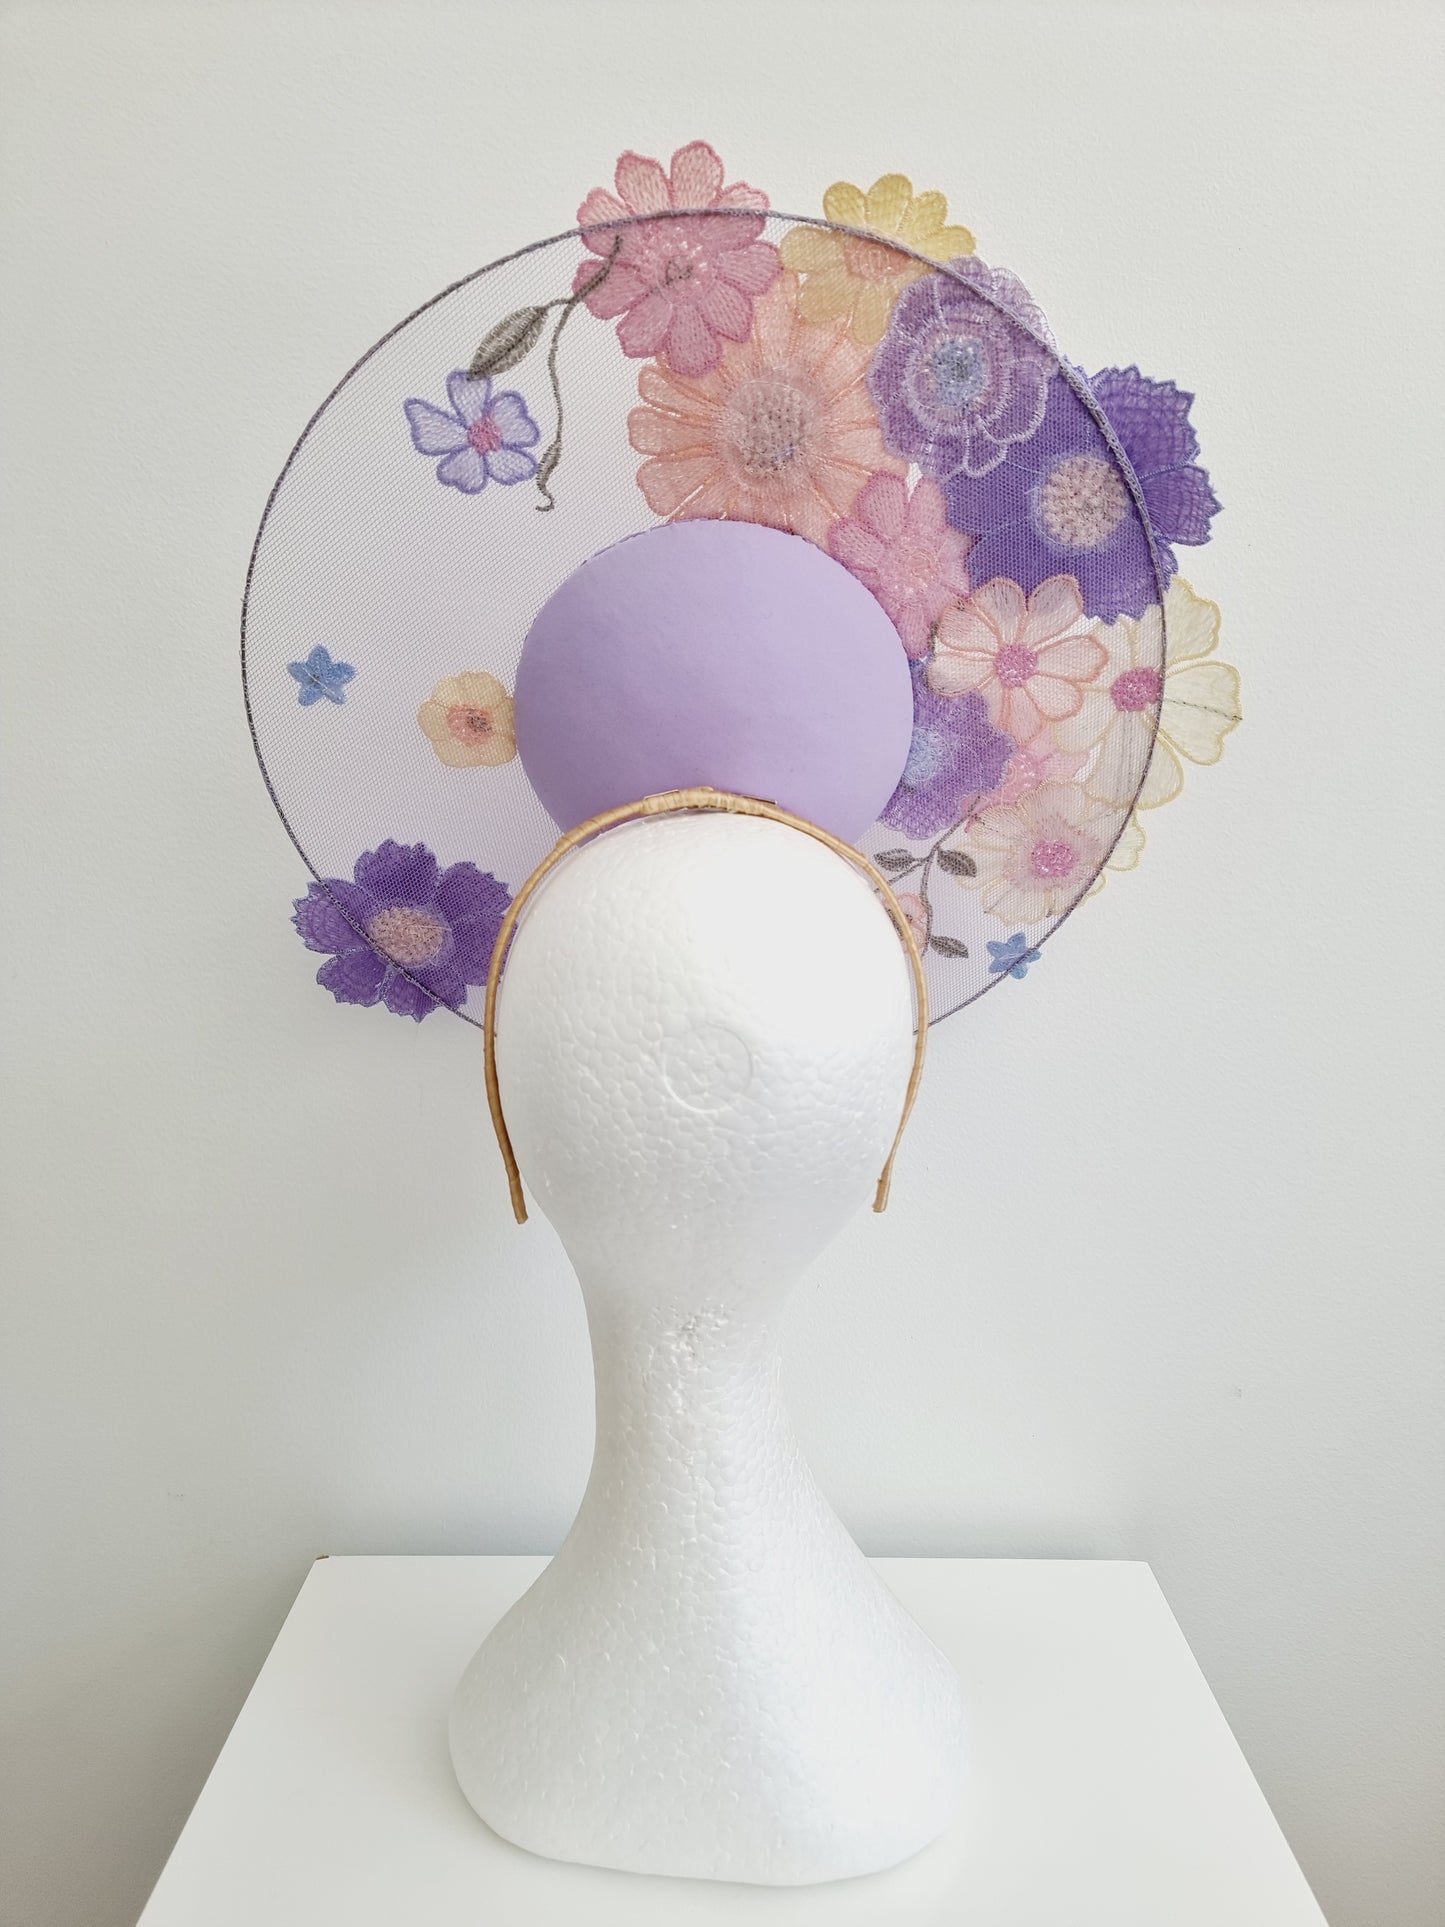 Miss Whimsical. Womens pastel satellite percher headband fascinator with flowers